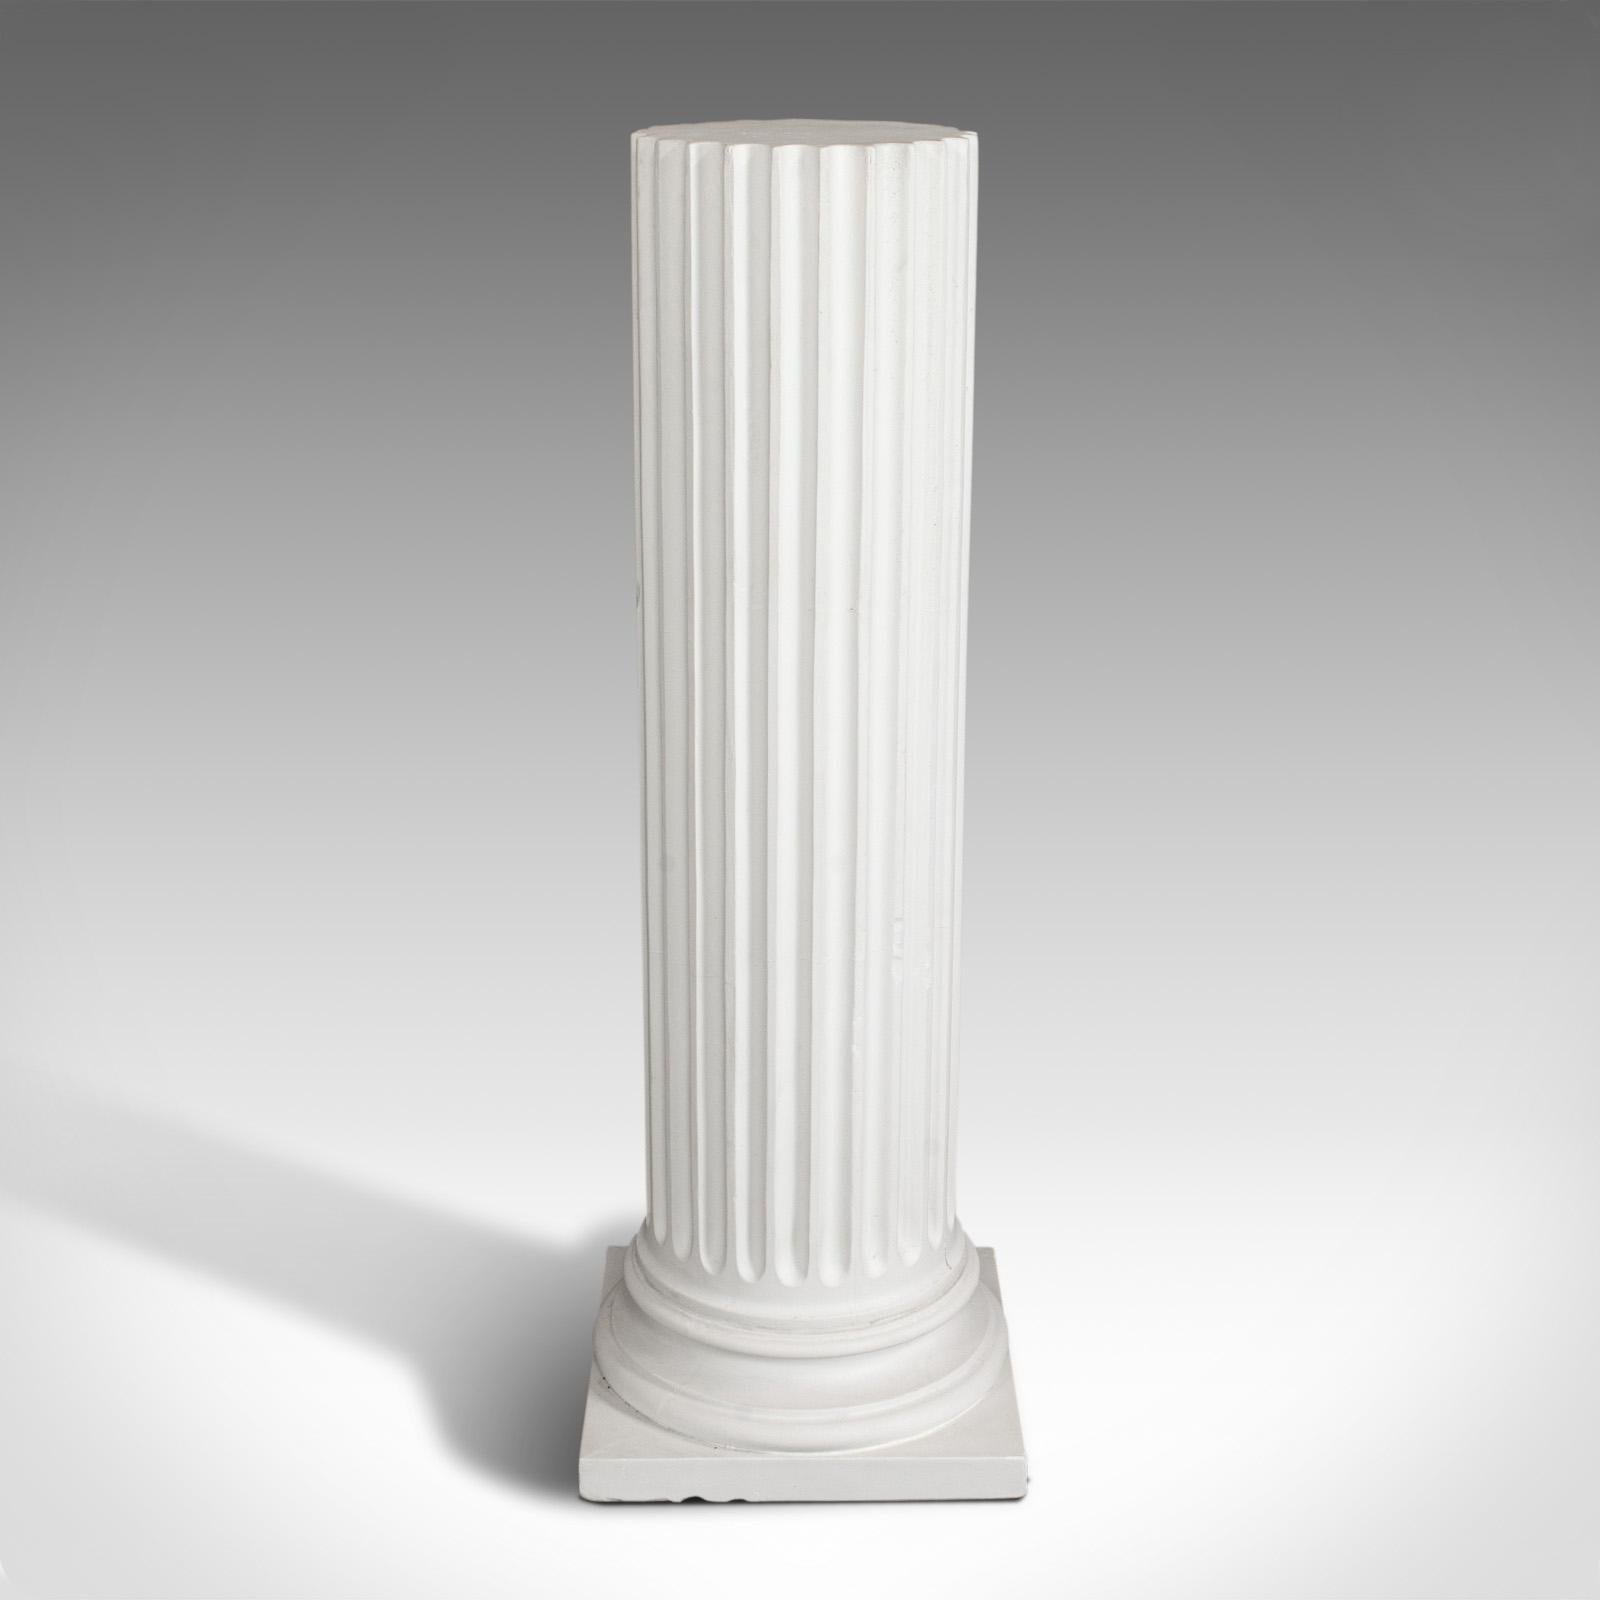 This is a vintage fluted column base. An English, architectural plaster Doric column in classical form, dating to the late 20th century. (Multiple available.)

Attractive, versatile classical revival pillar
Displays a desirable aged patina
Small